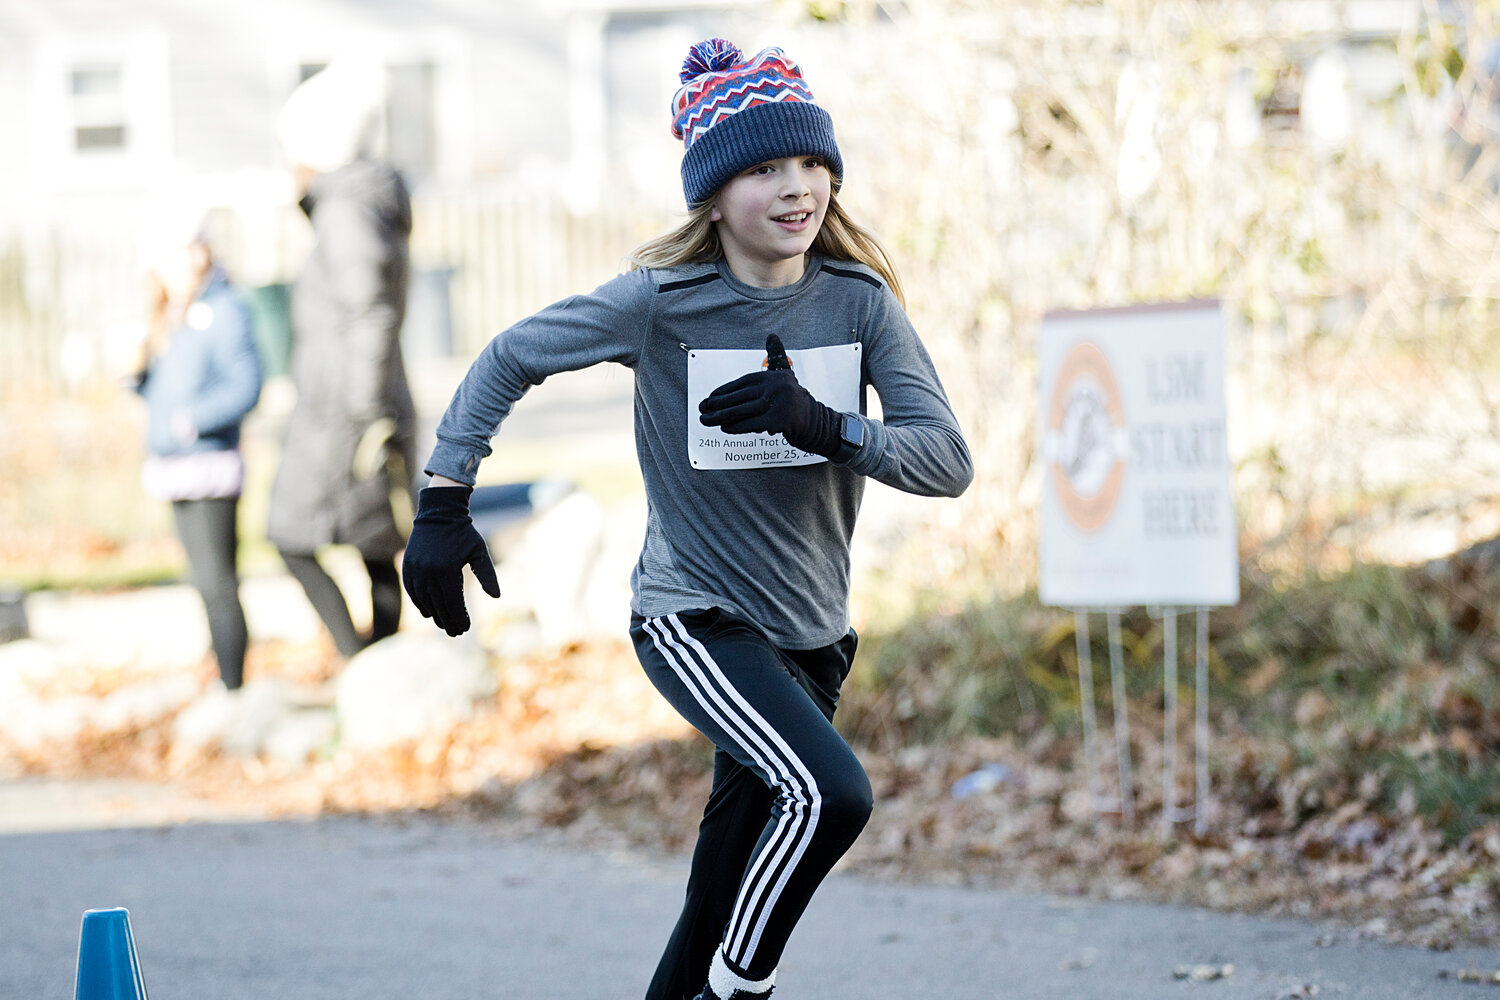 Dax Dimery runs toward the finish line of the 24th annual Trot Off Your Turkey 1.5 mile race.